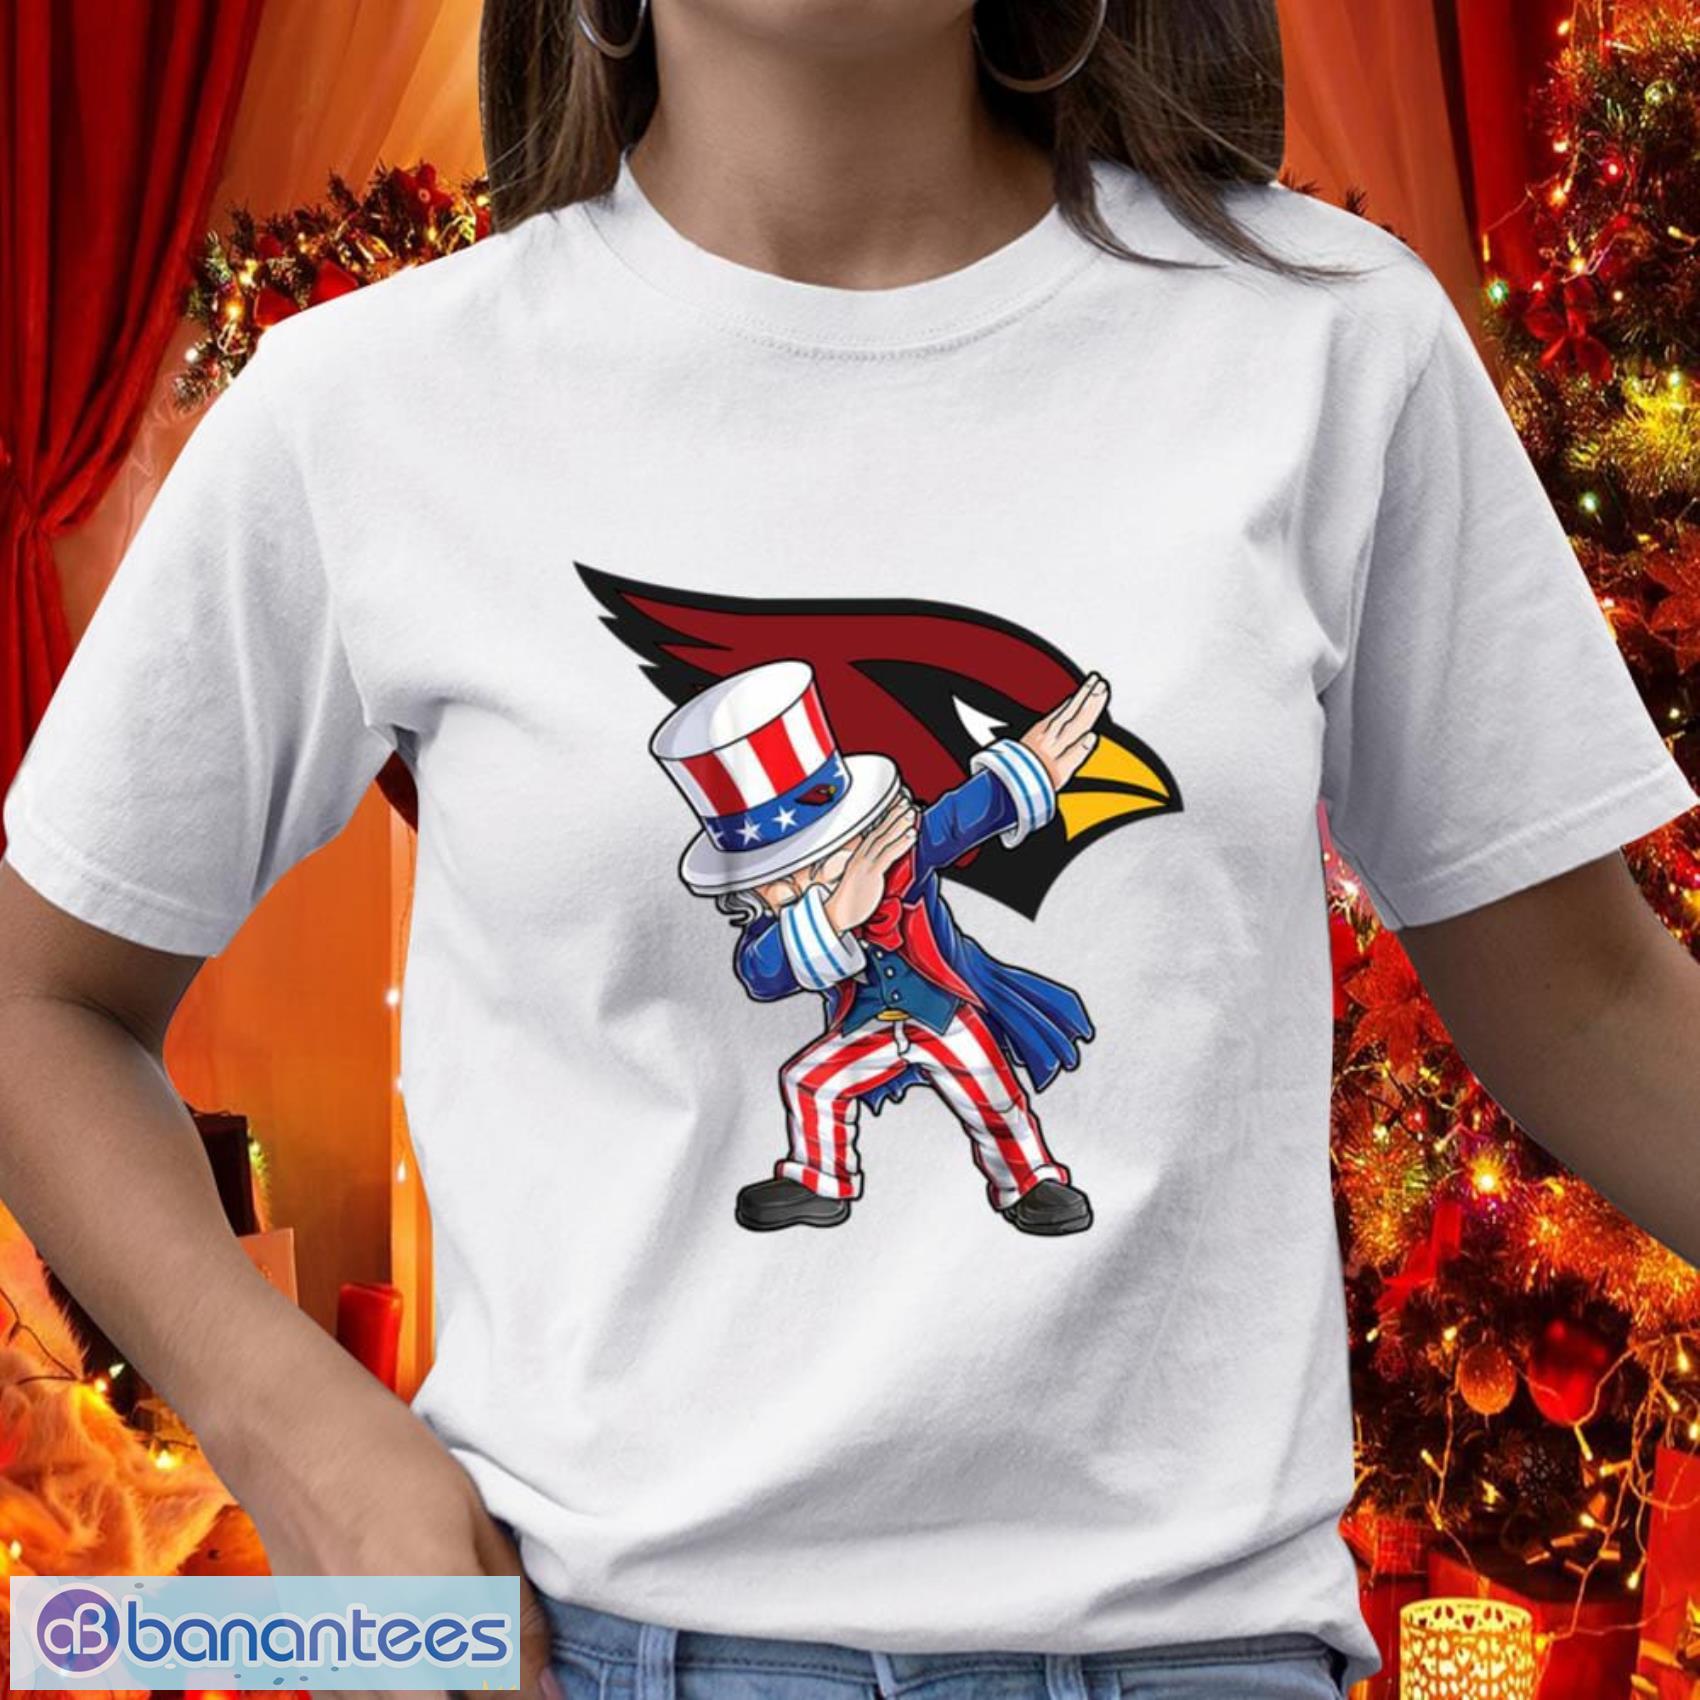 Arizona Cardinals NFL Football Gift Fr Fans Dabbing Uncle Sam The Fourth of July T Shirt - Arizona Cardinals NFL Football Dabbing Uncle Sam The Fourth of July T Shirt_1